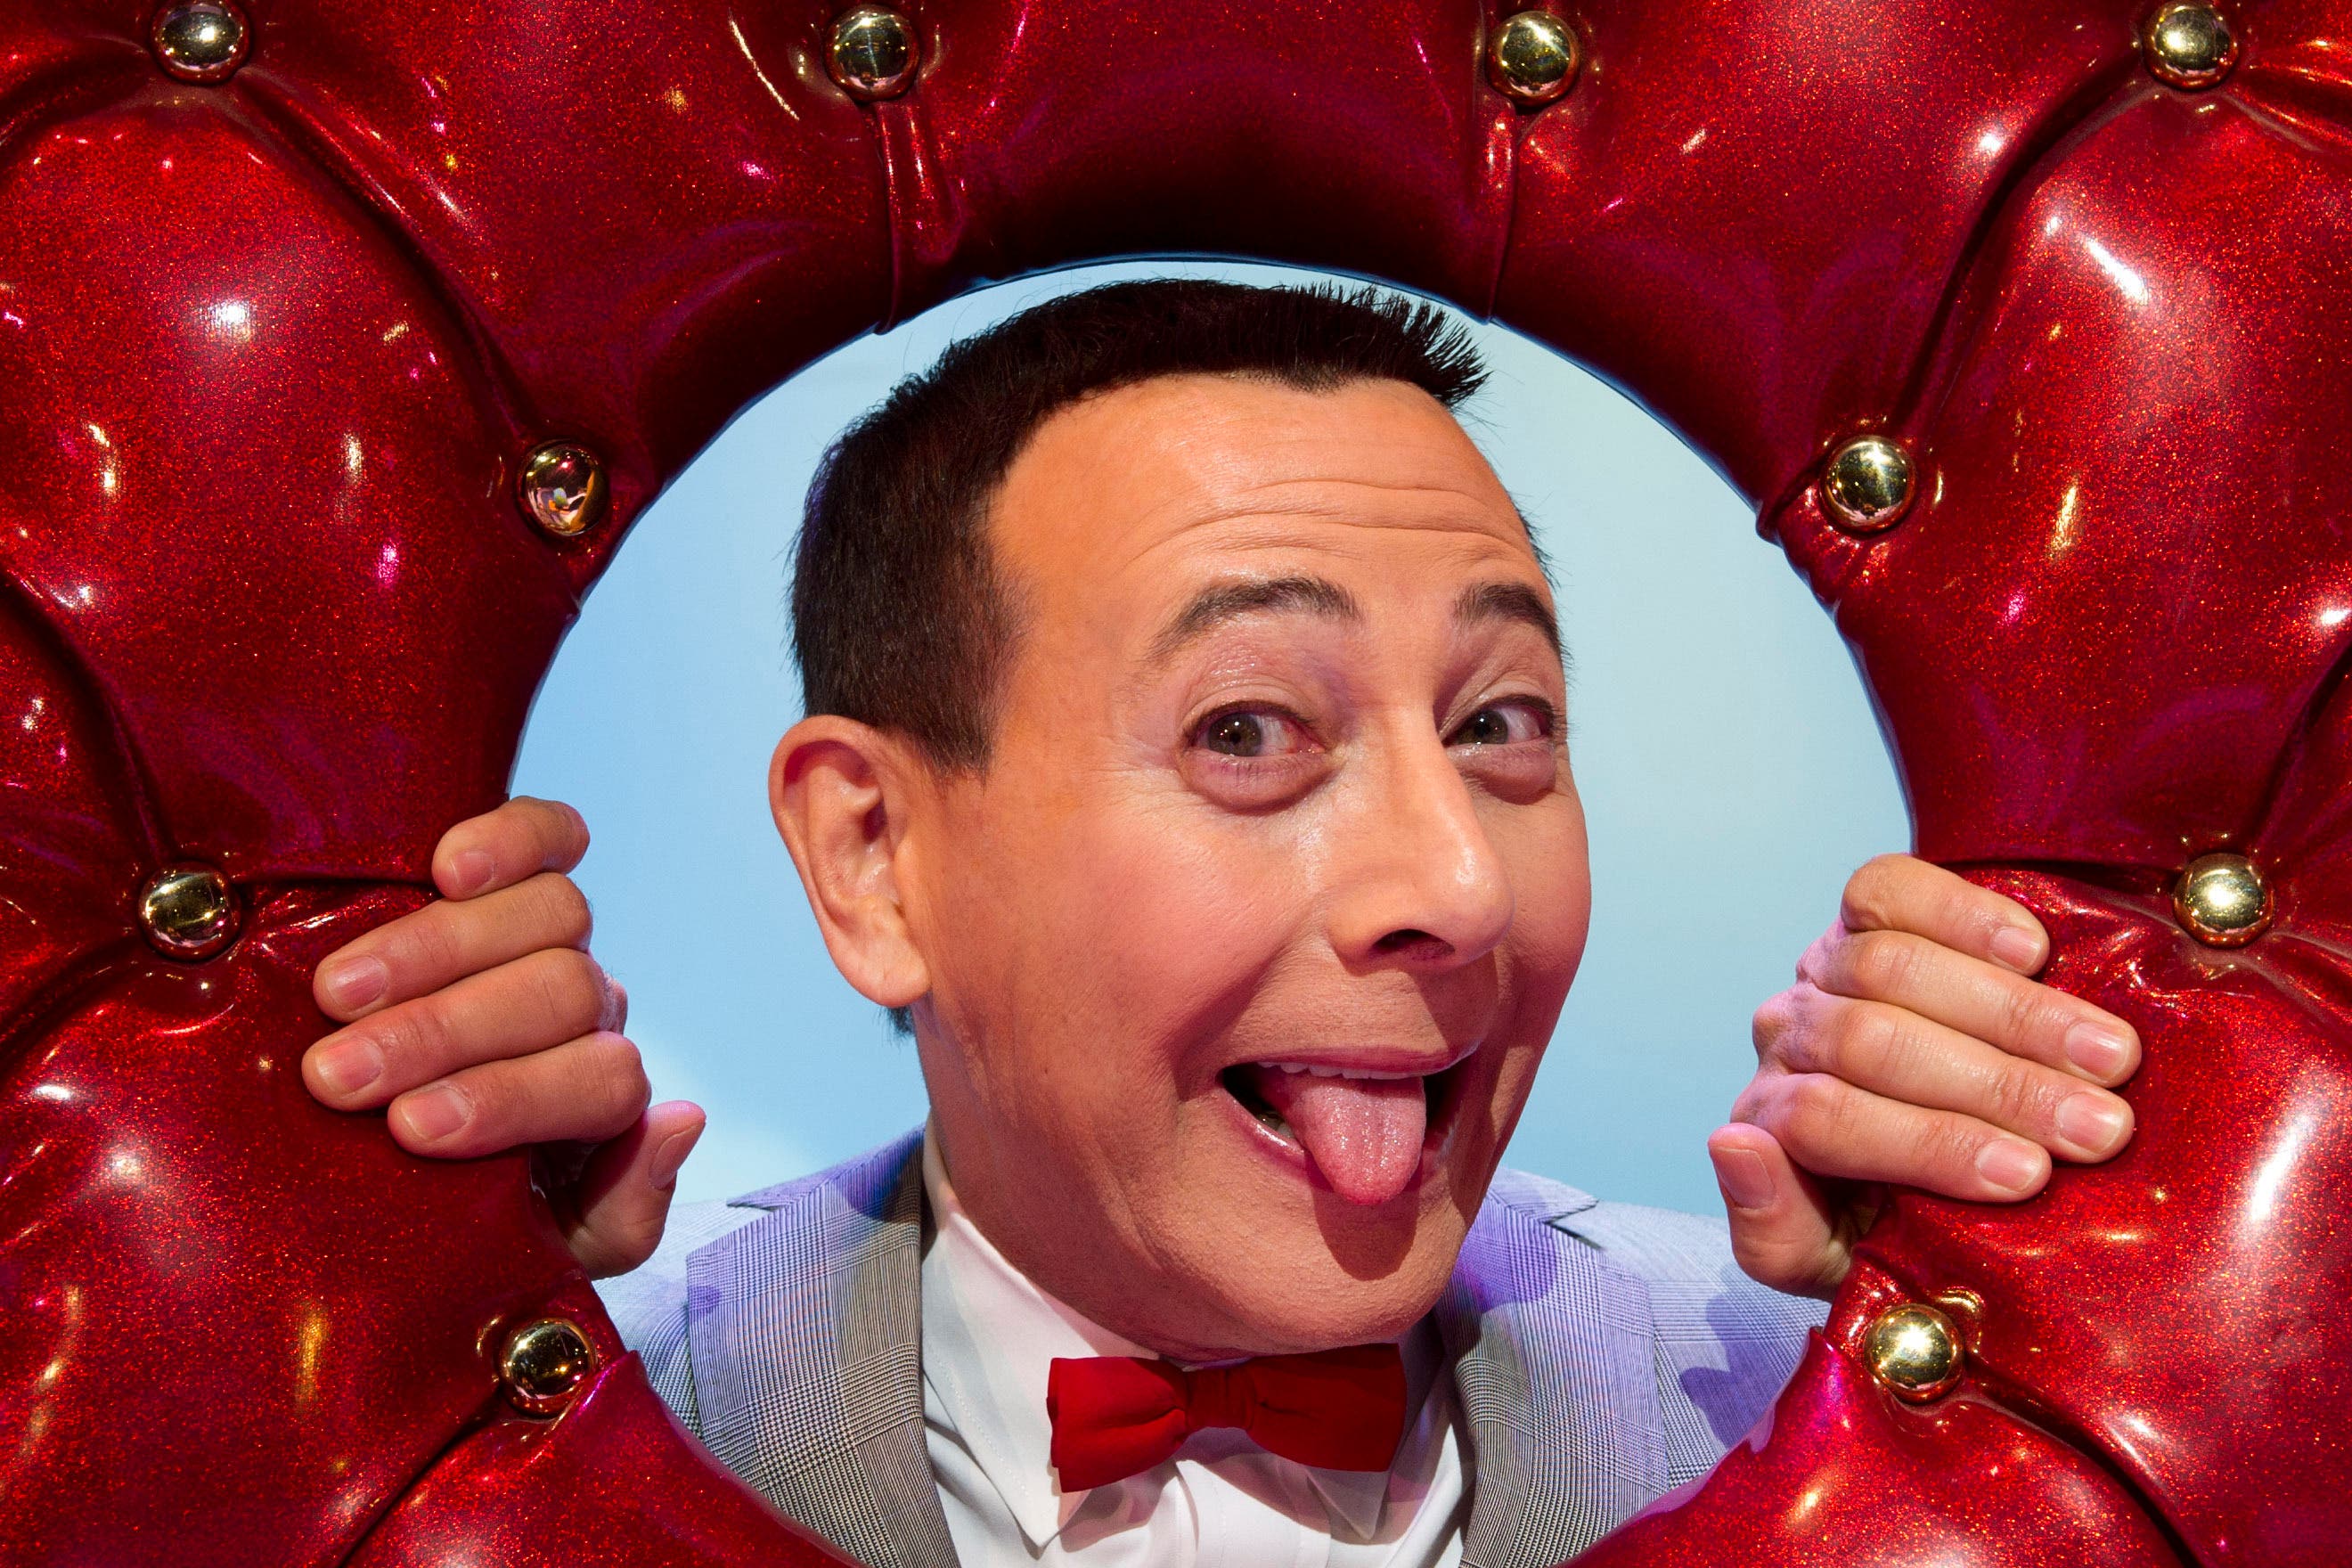 Paul Reubens, best known for his character Pee-wee Herman, has been remembered for his ‘devout silliness and unrelenting kindness’ following his death at the age of 70 (Charles Sykes/AP)